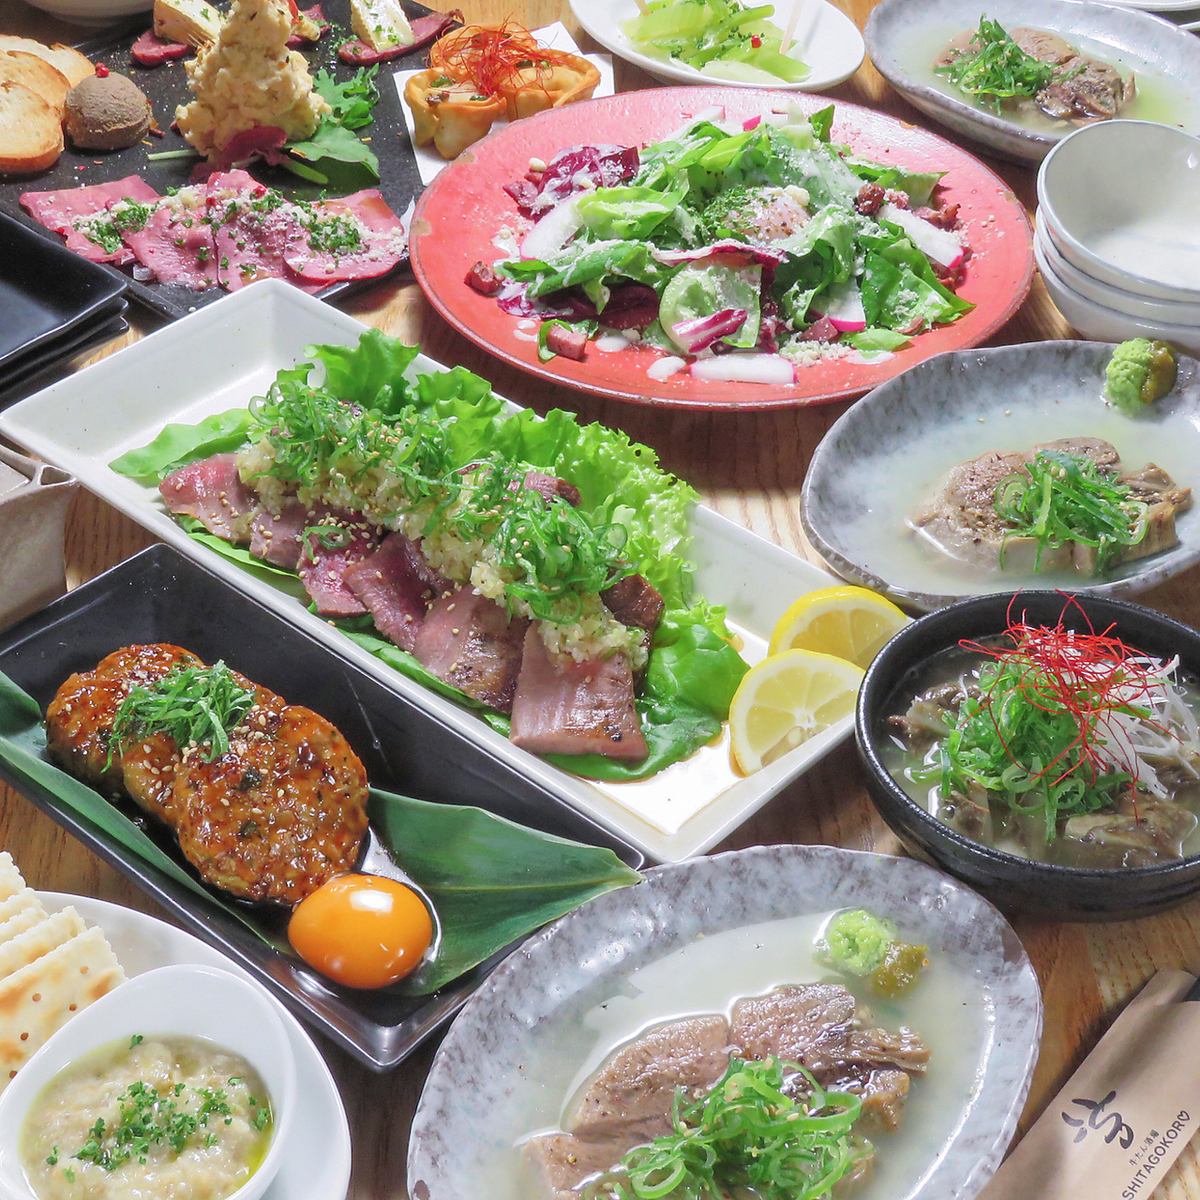 An independent store from "Beef Tongue Ishii" celebrating its 30th anniversary in Chofu